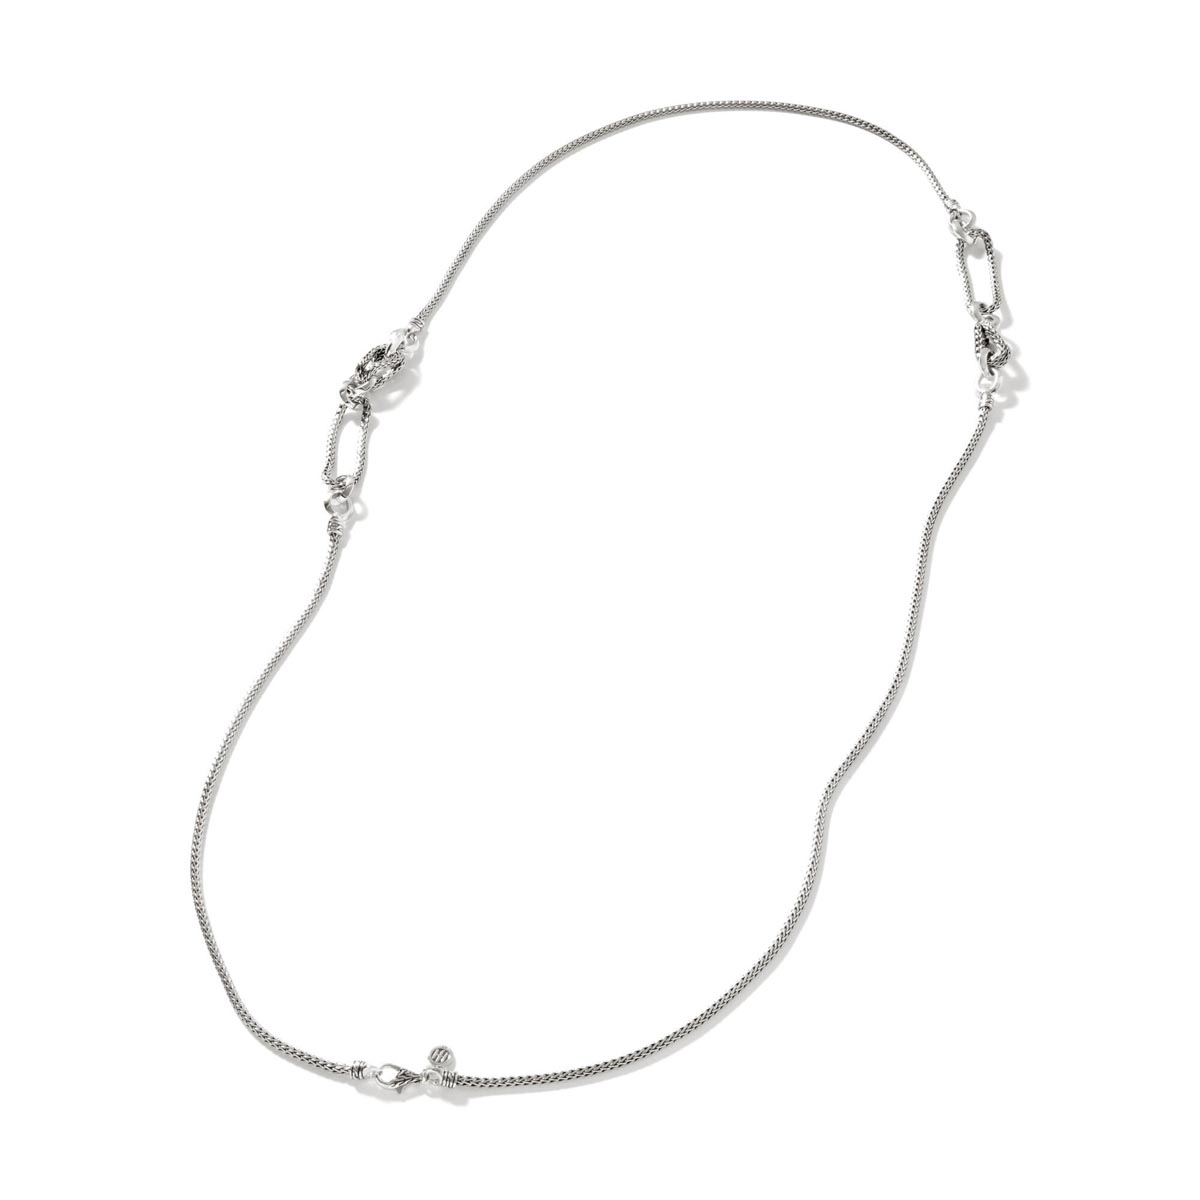 John Hardy Classic Chain Collection Asli Sautoir Necklace in Sterling Silver